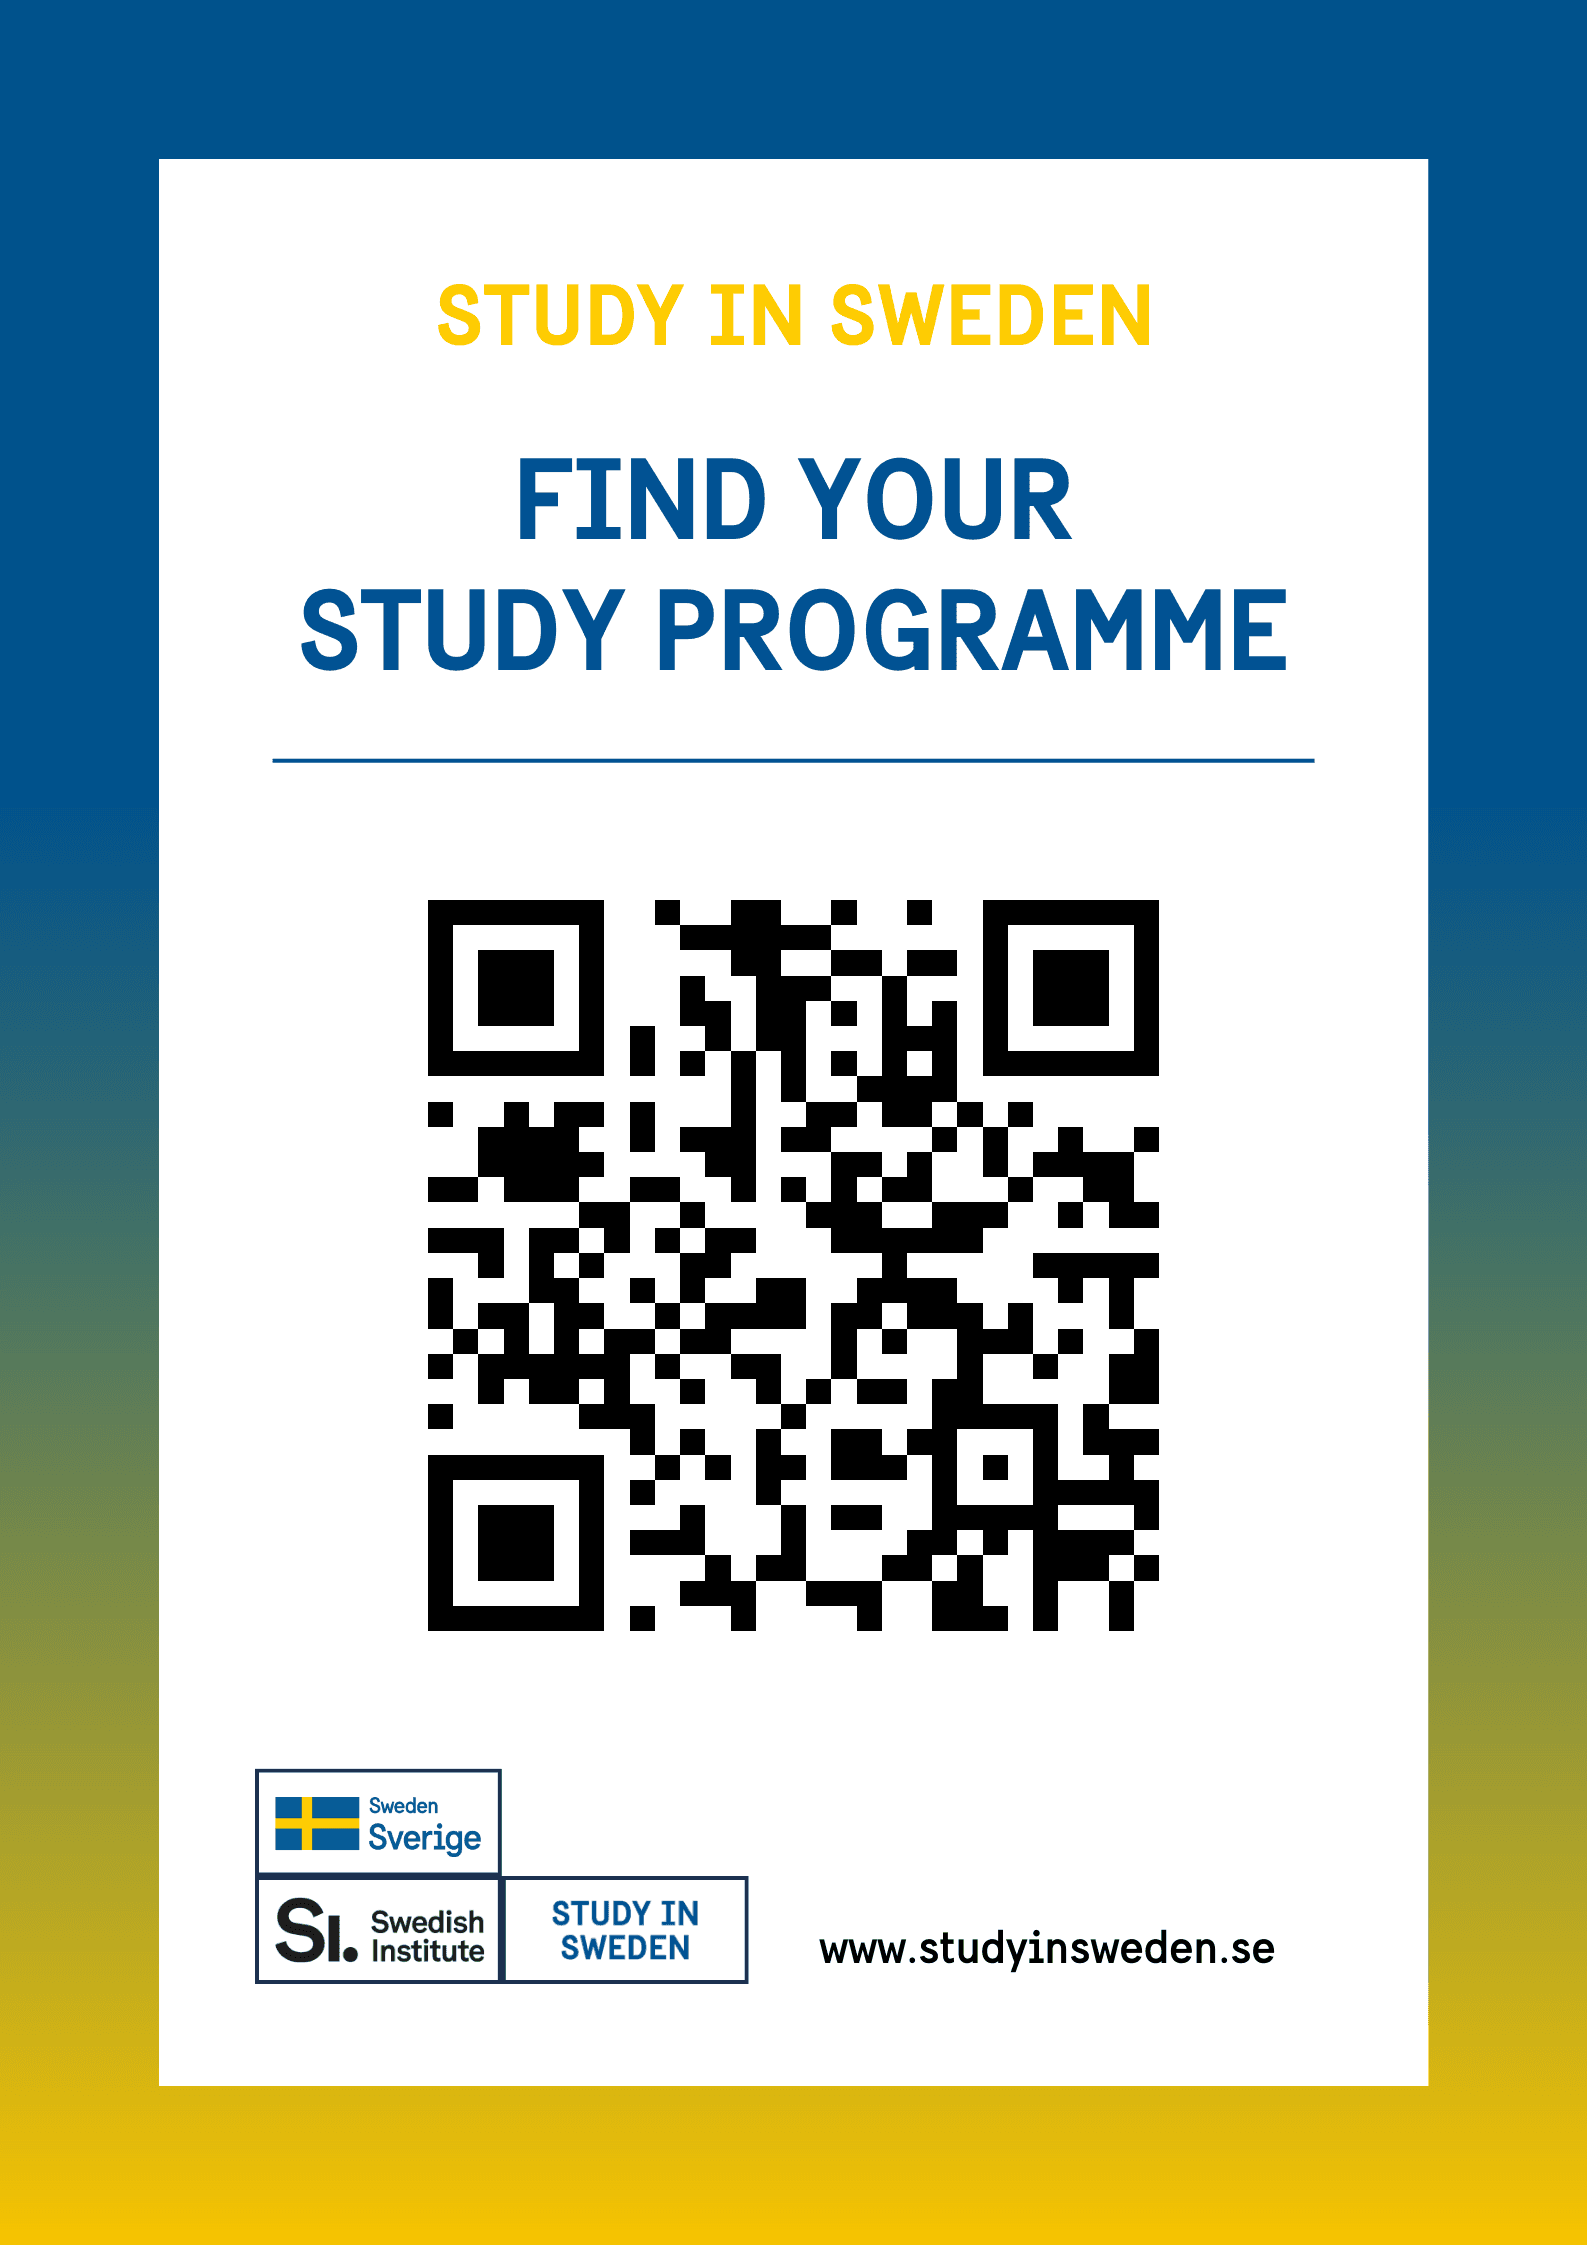 Find your study programme